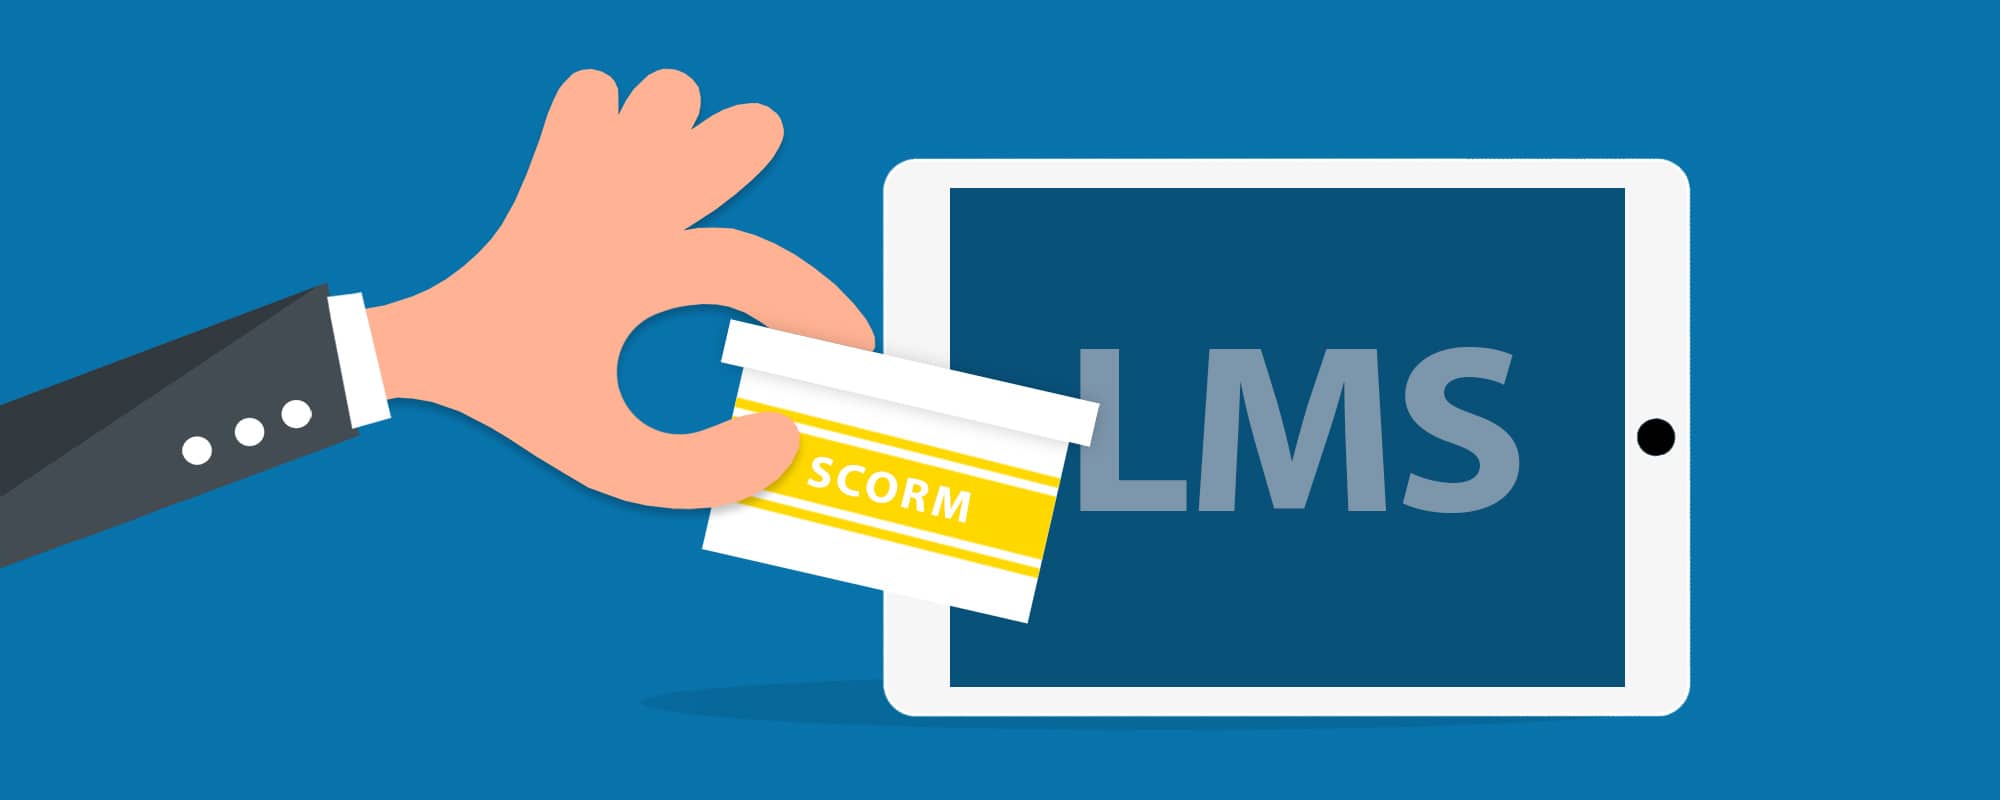 How Important is SCORM in e-Learning?